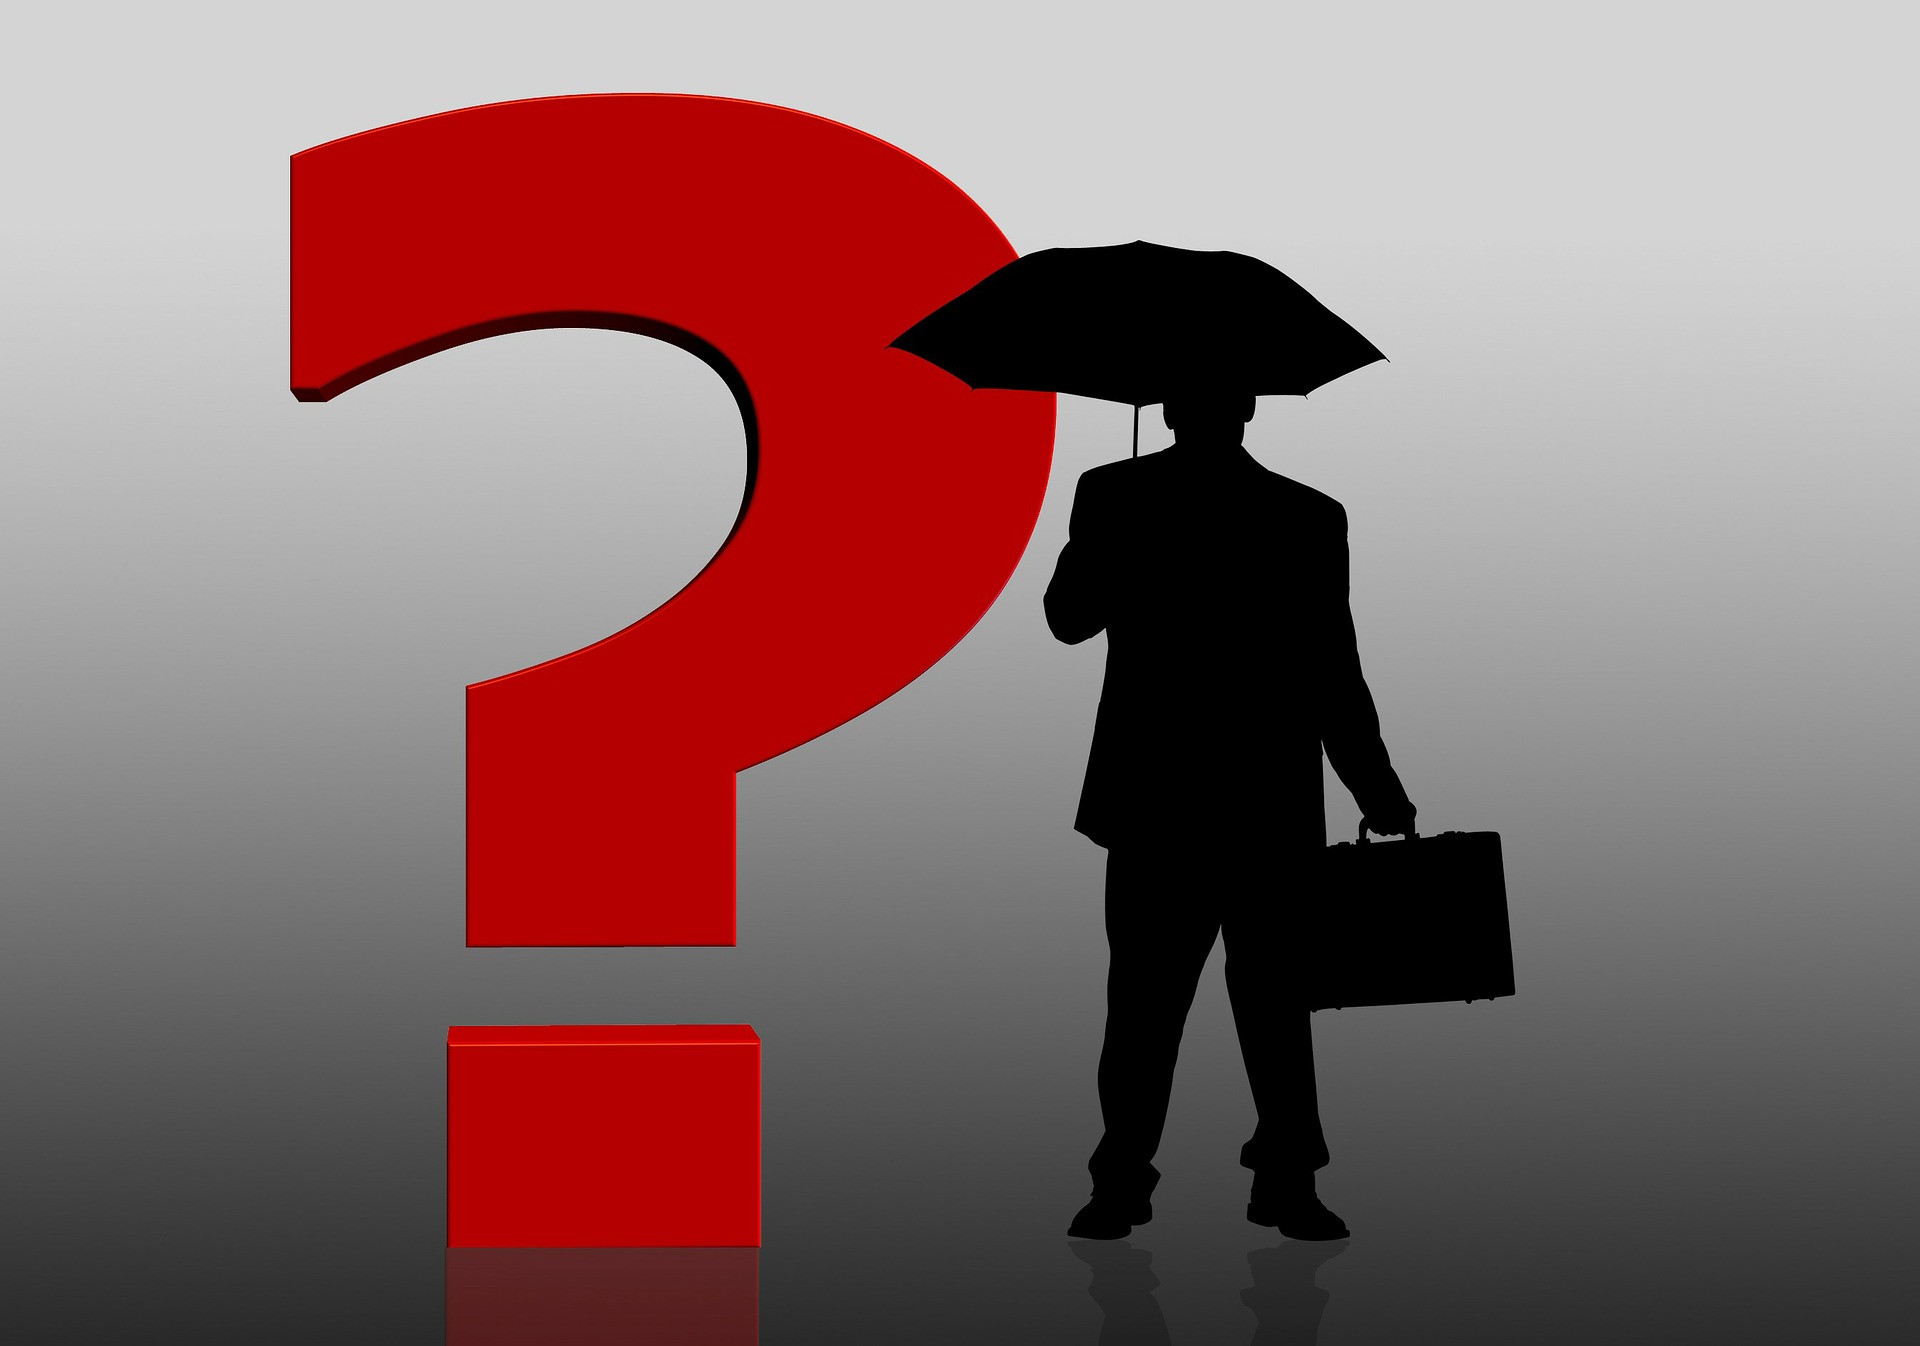 Red question mark with a black silhouette of a man holding an umbrella and suitcase